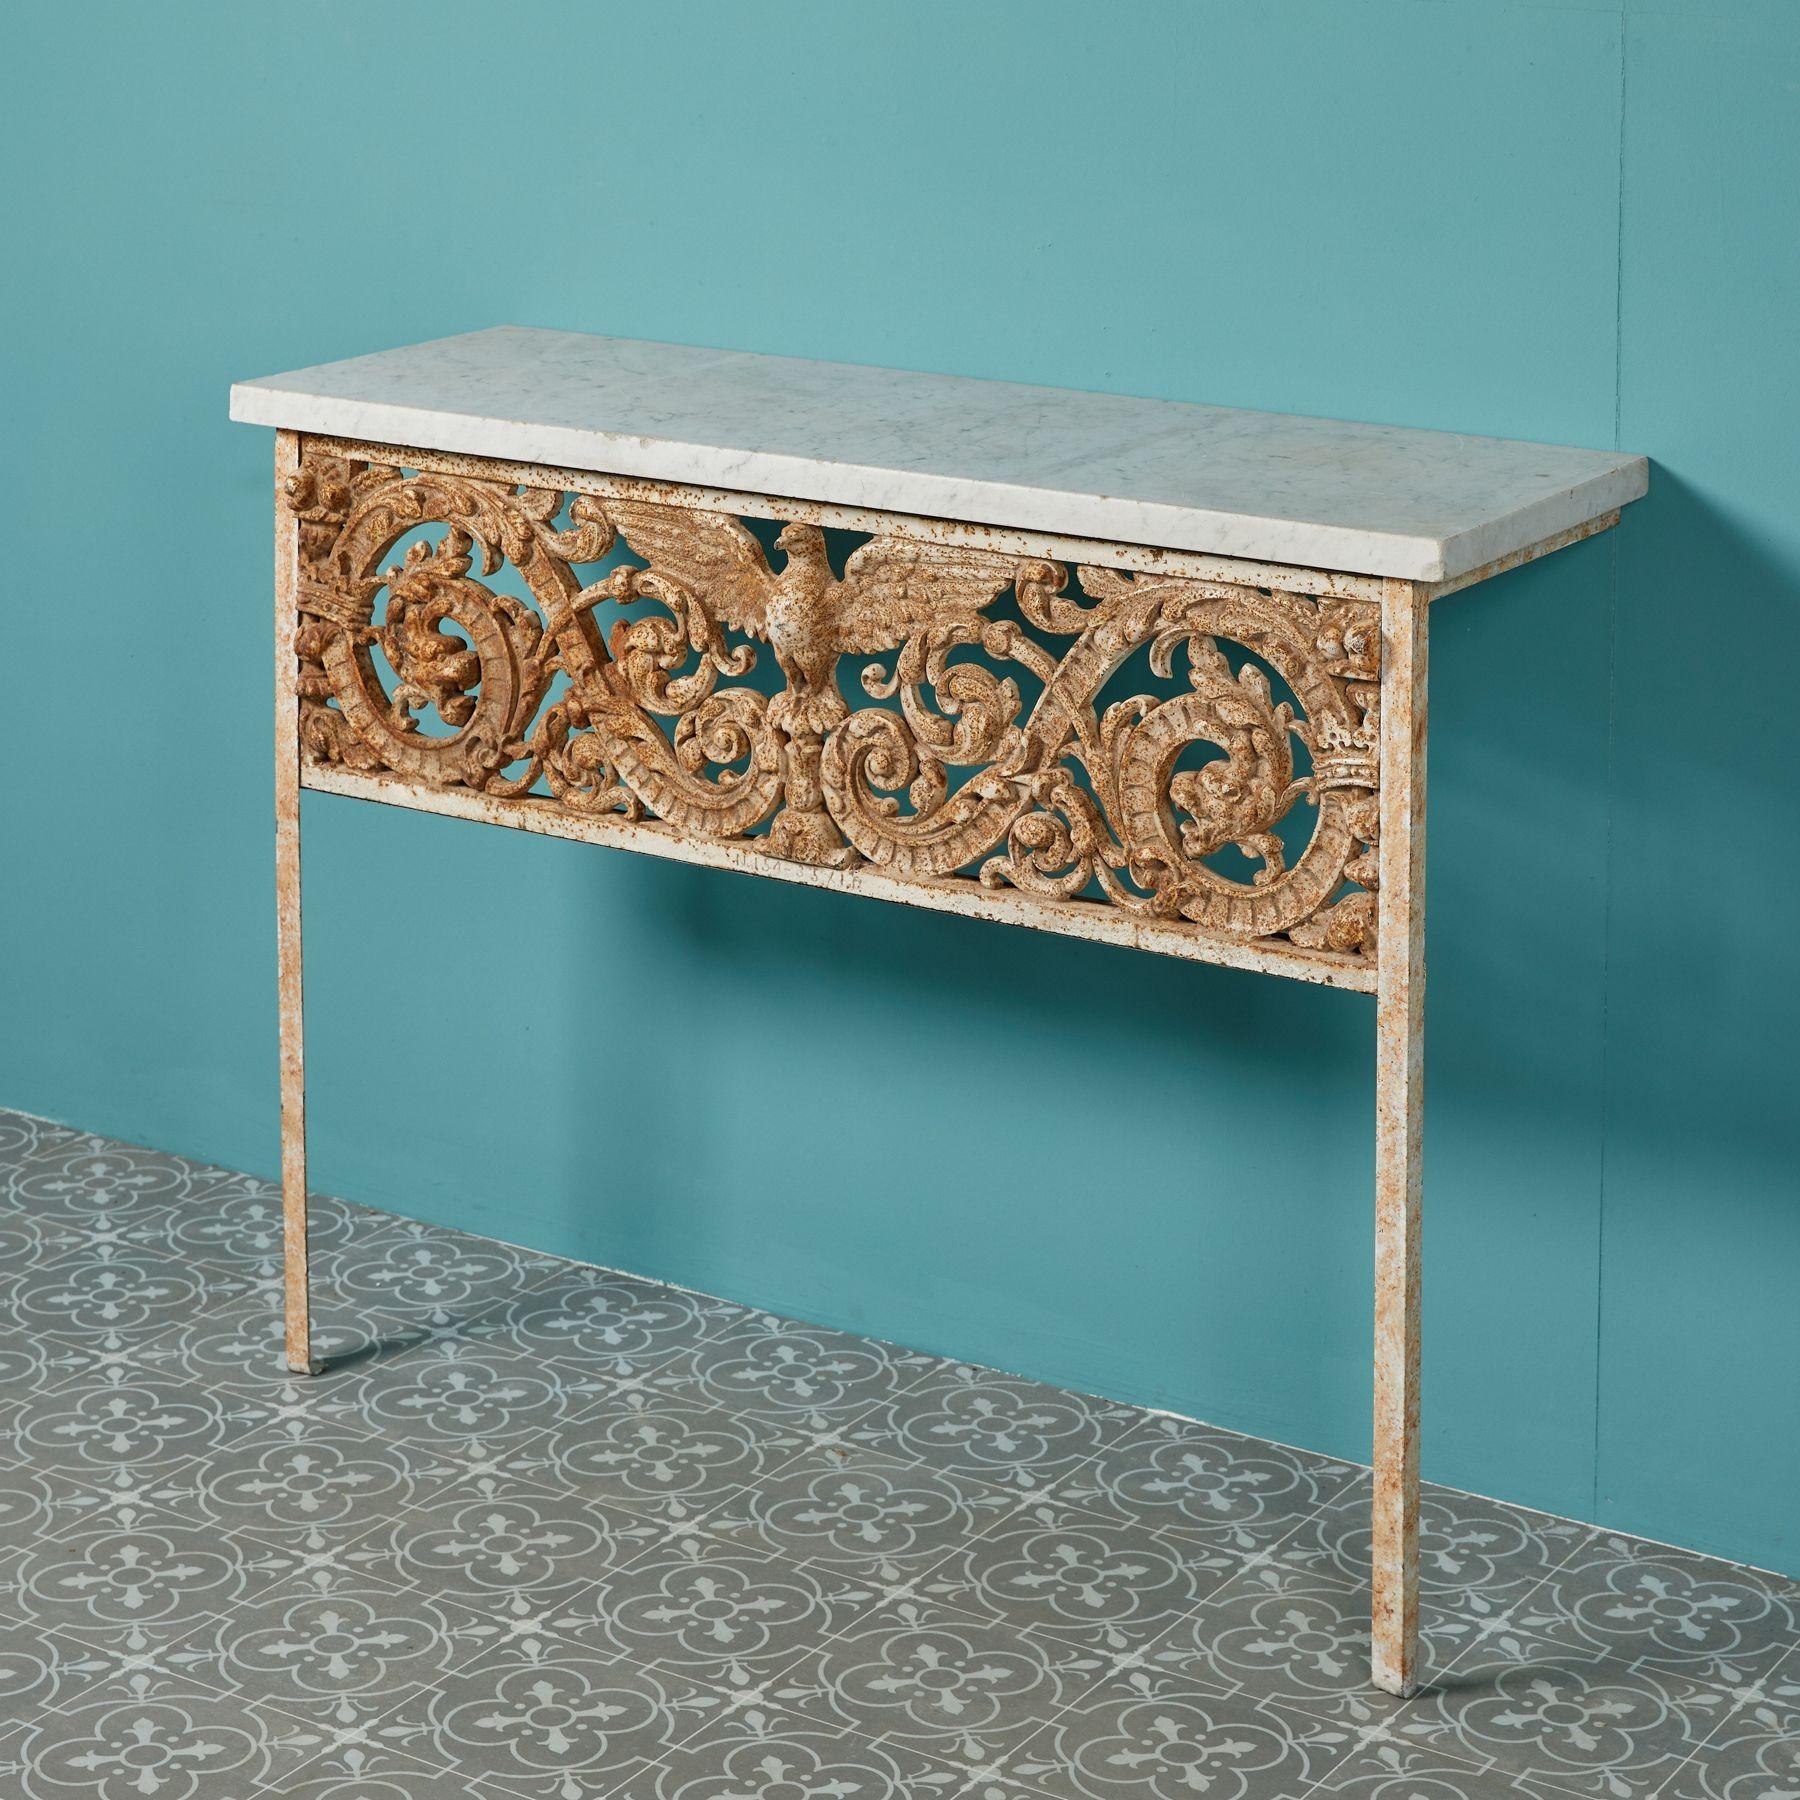 A highly decorative pair of antique console tables. Ornately decorated with stylised dragons, crowns, foliage and swags, these tables blend modern components with classical styling, making them a handsome focal point in interiors traditional and